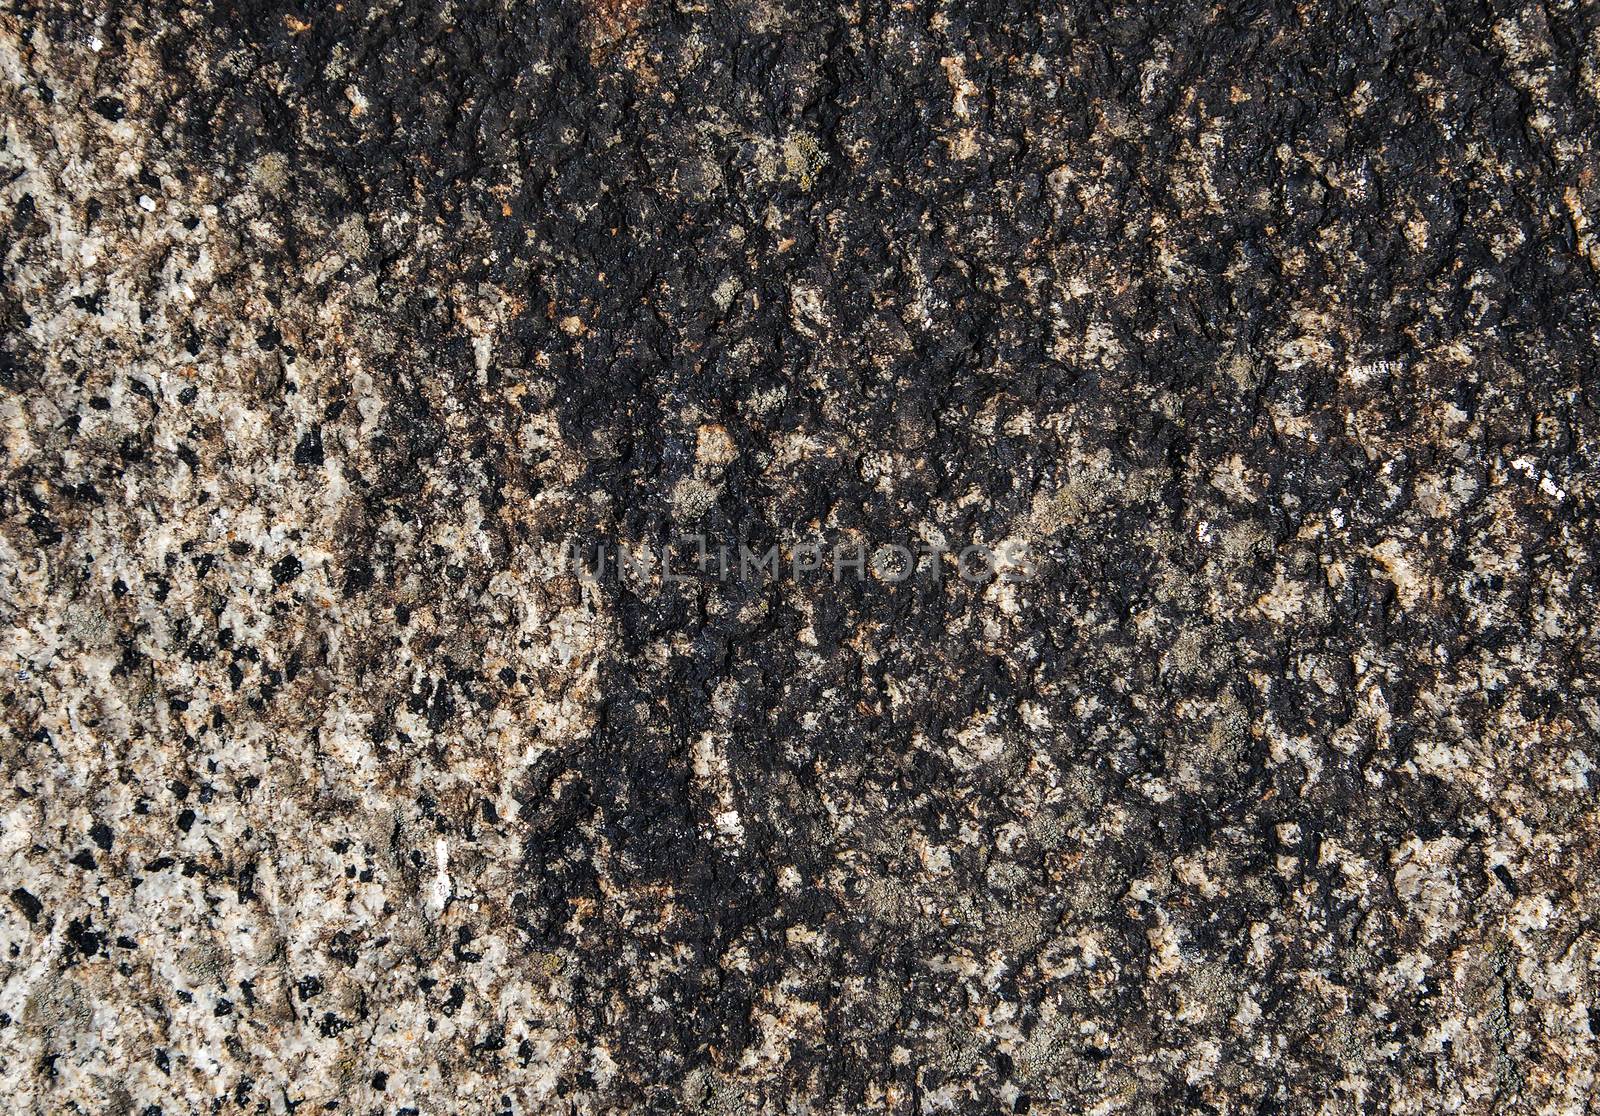 Close-up of an old granite stone pattern with black colorization.